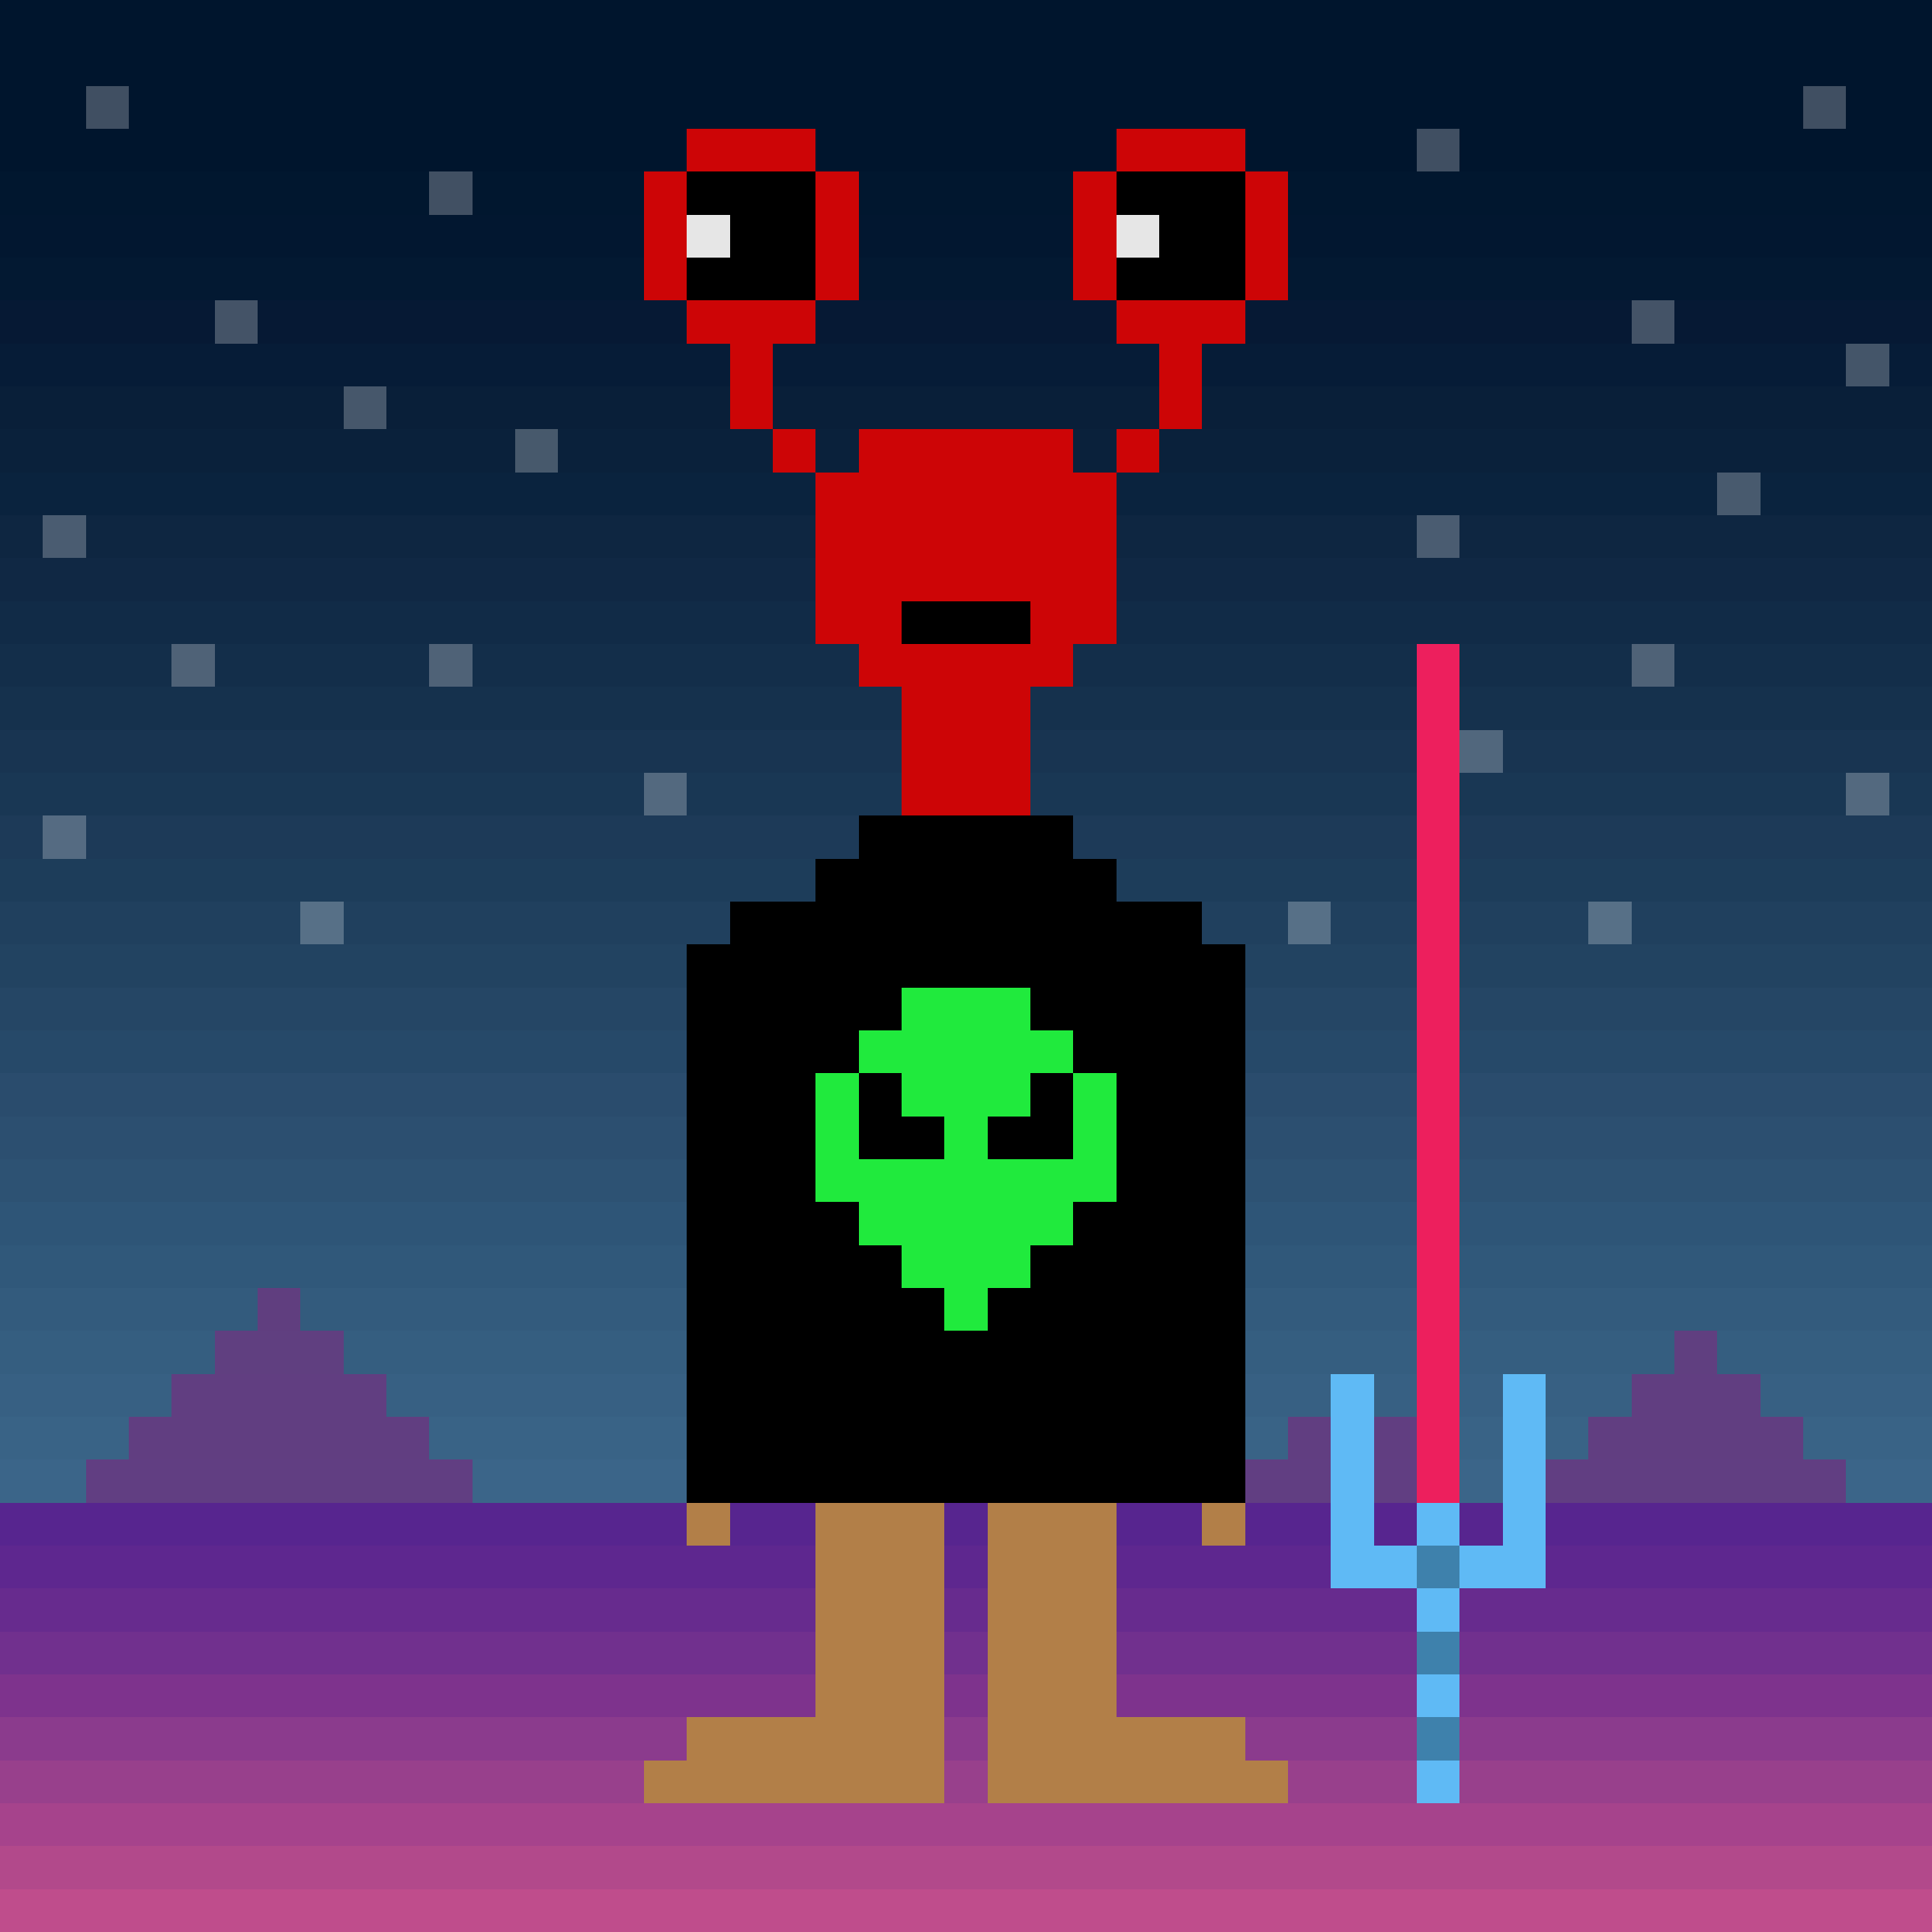 A pixel drawing of an alien with two bulbous eyes on red antennae, standing in a barren otherworldly landscape beside a light saber